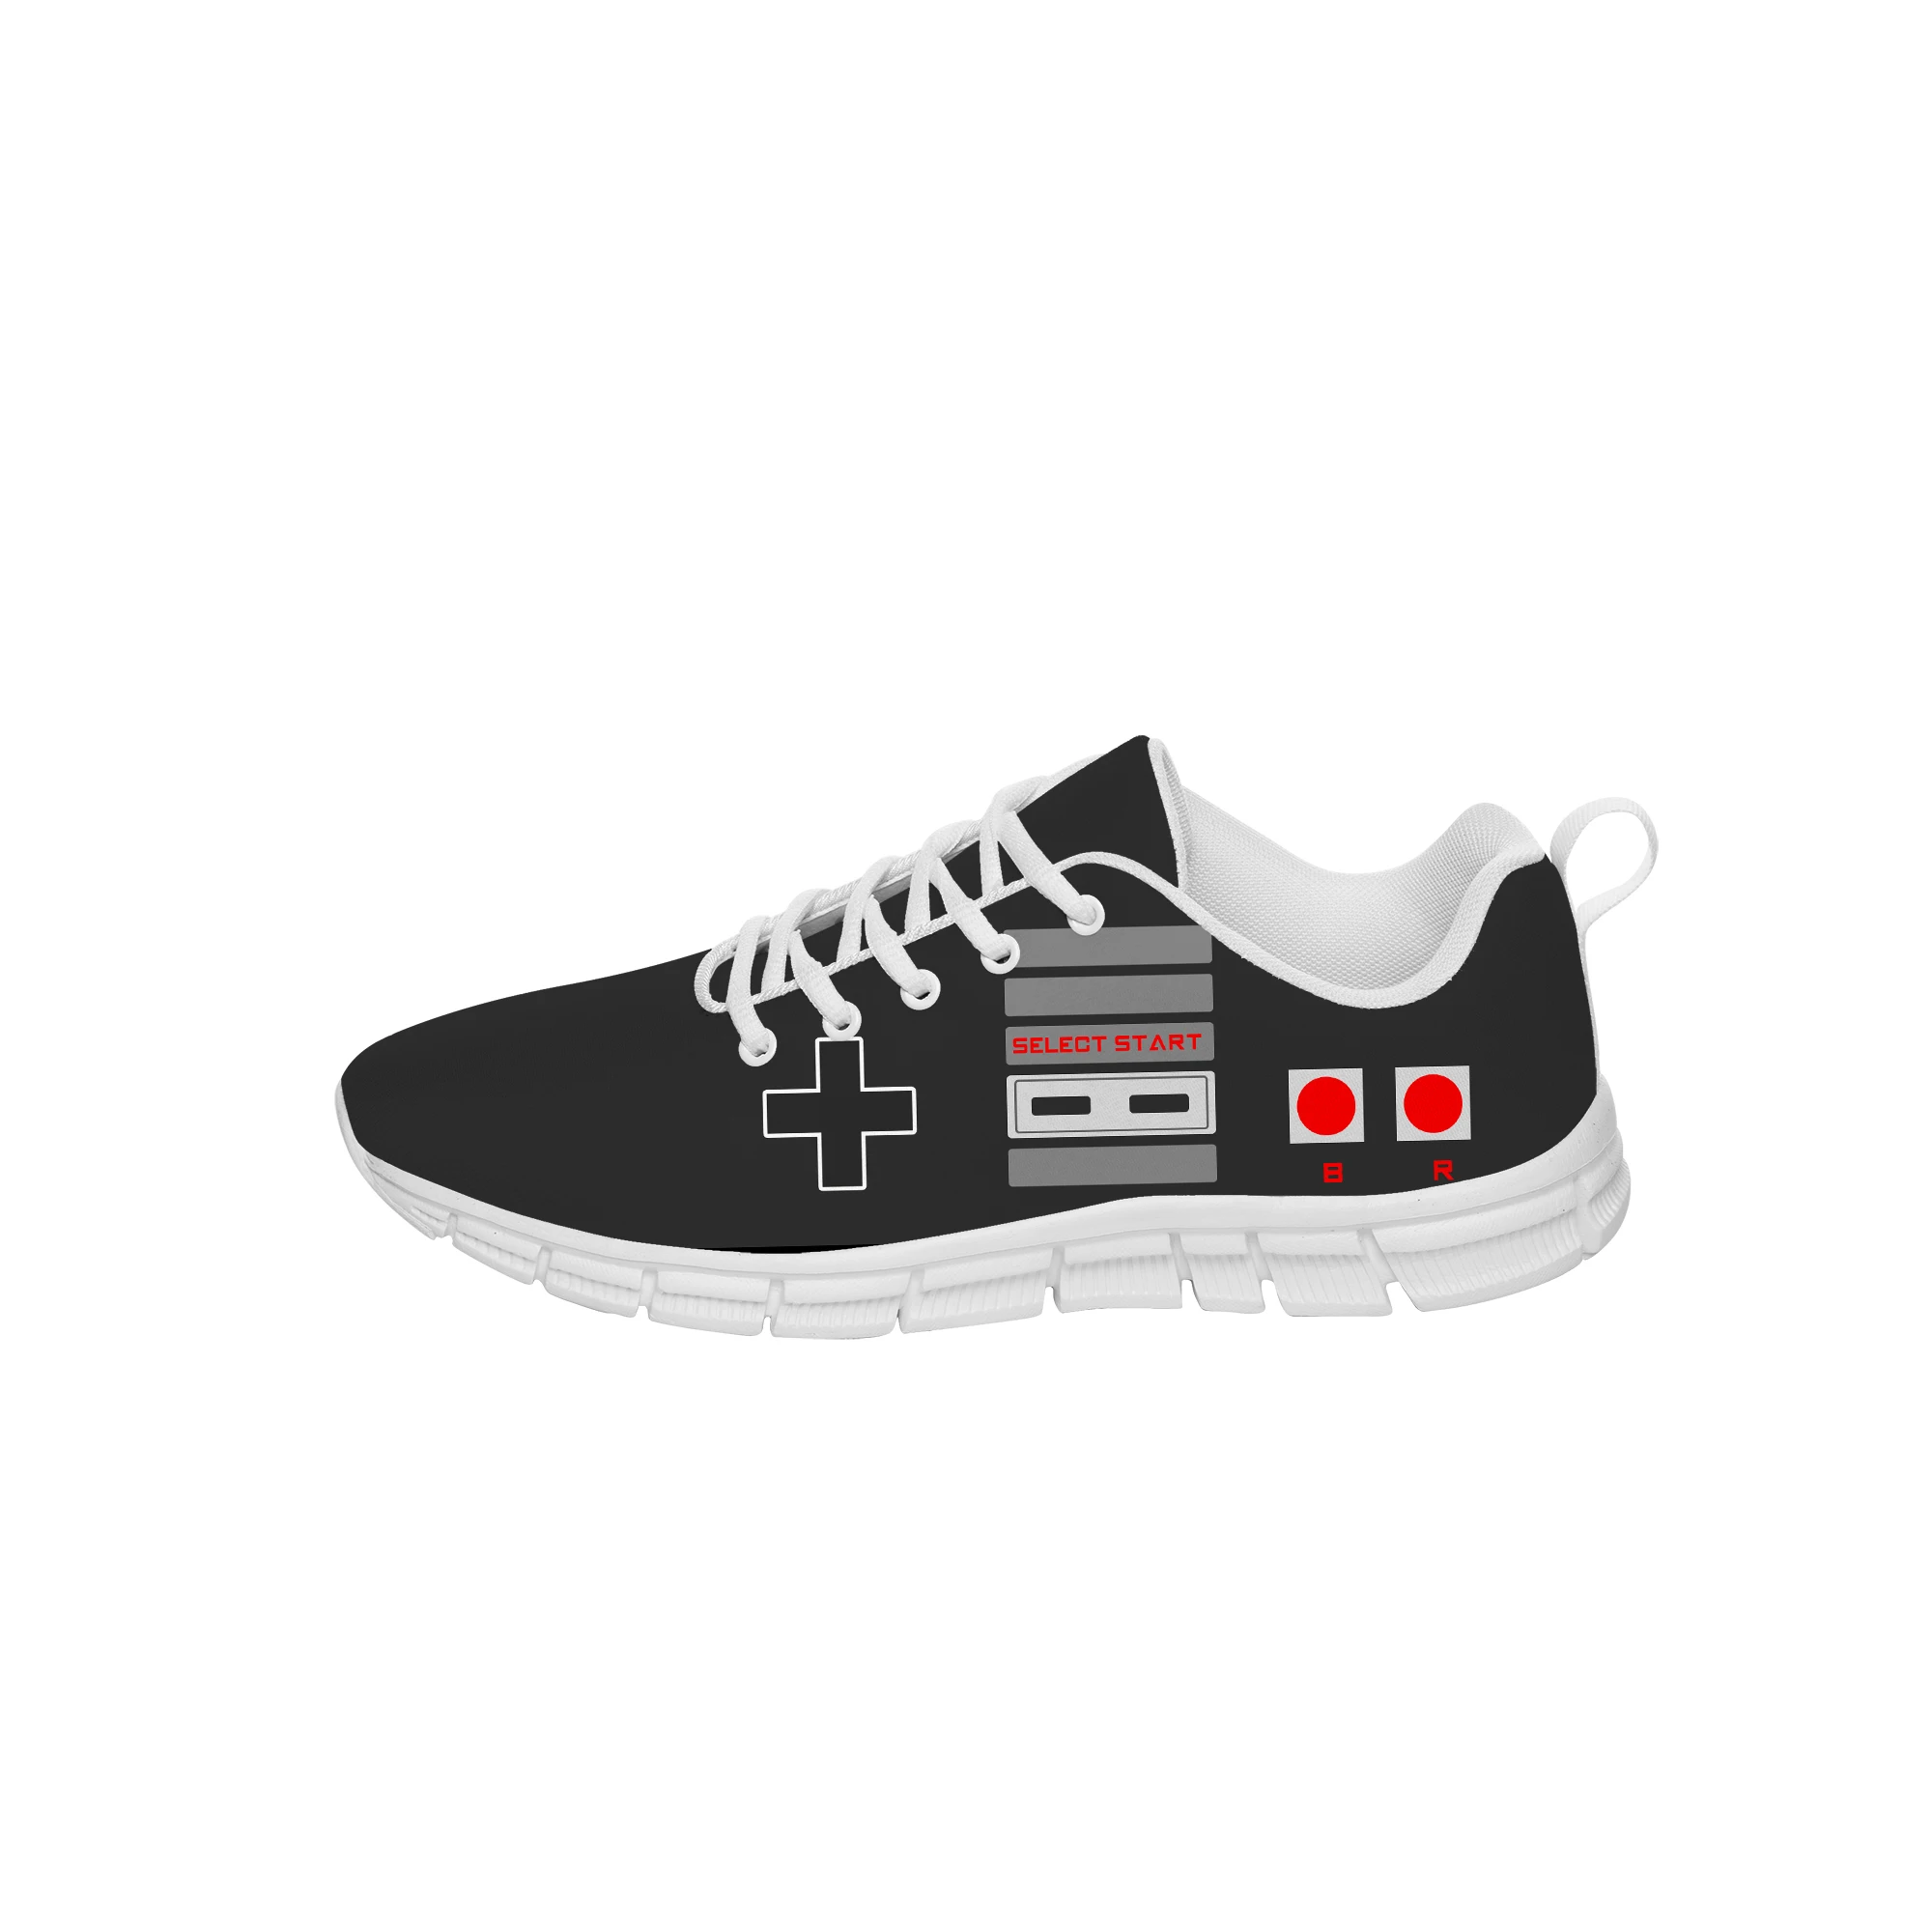 Nintendo Nes Controller Sneakers Mens Womens Teenager Casual Cloth Shoes Canvas Running Shoes 3D Print Lightweight shoe